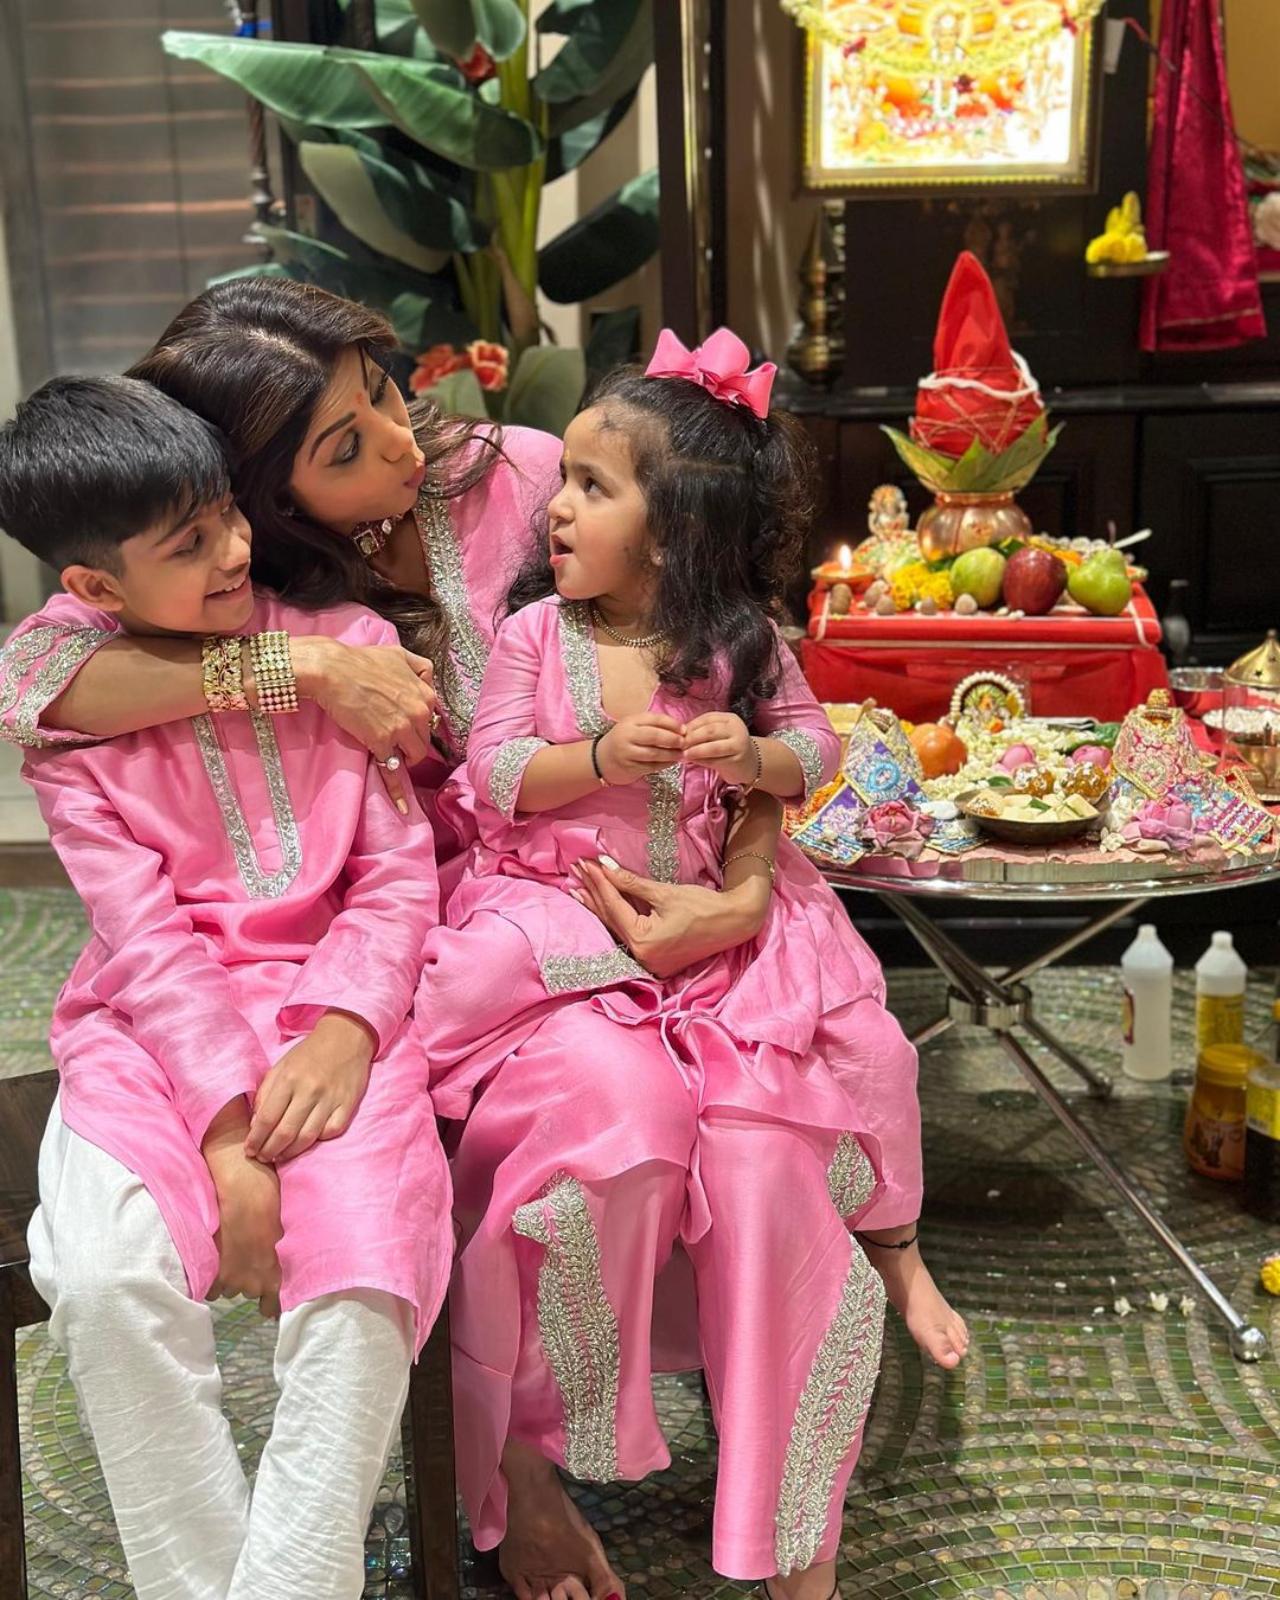 Shilpa often takes to her Instagram handle to share adorable pictures with her family